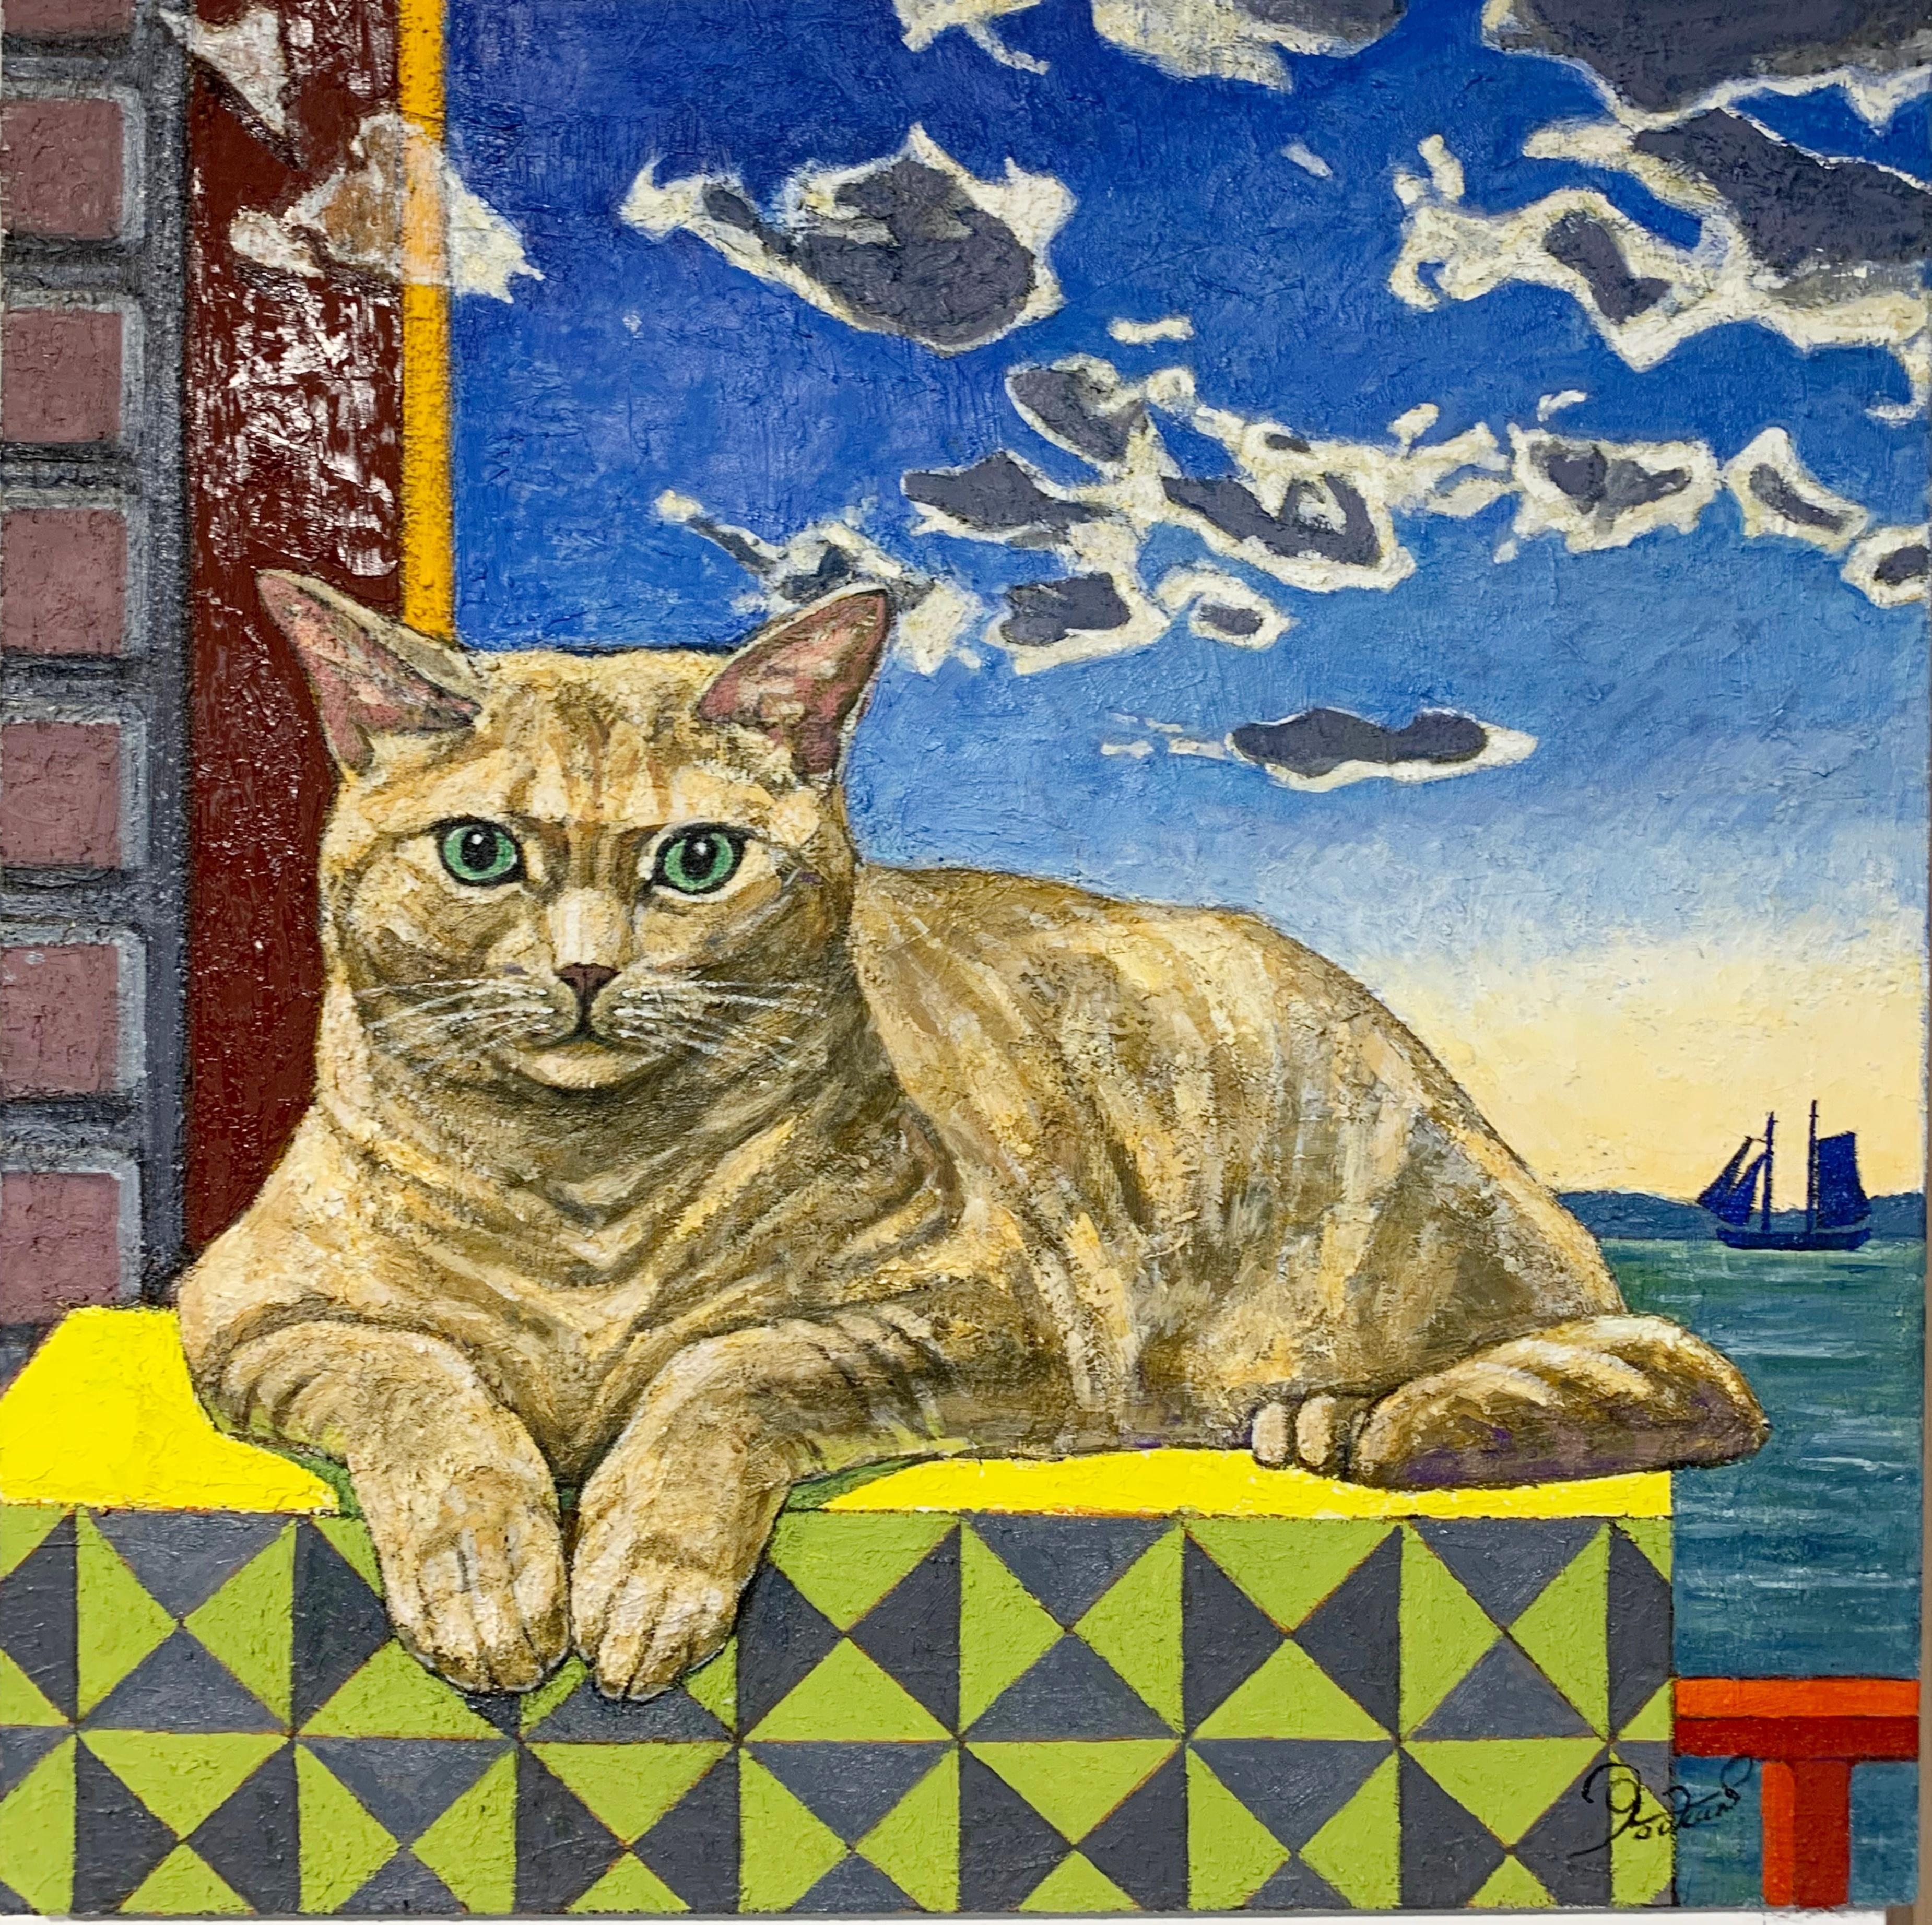 Yookan Westfield Figurative Painting - Orange Cat's Thoughts (original painting by renowned cat painter)